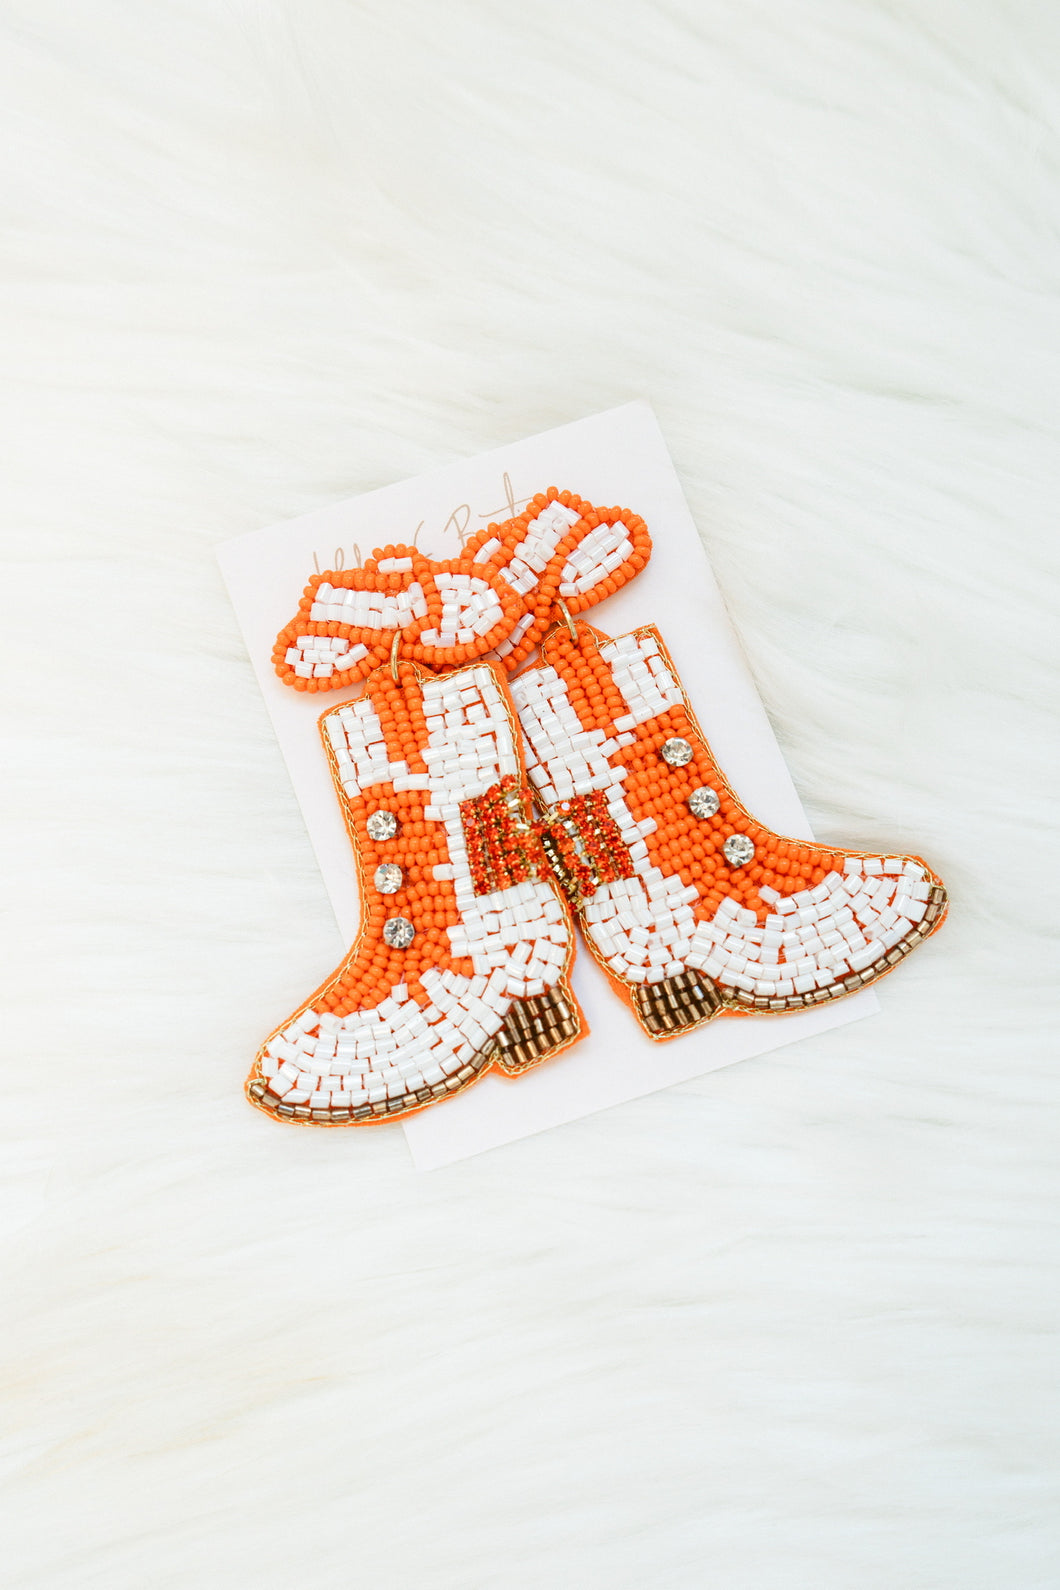 Orange and White Game Day Seed Bead Earrings